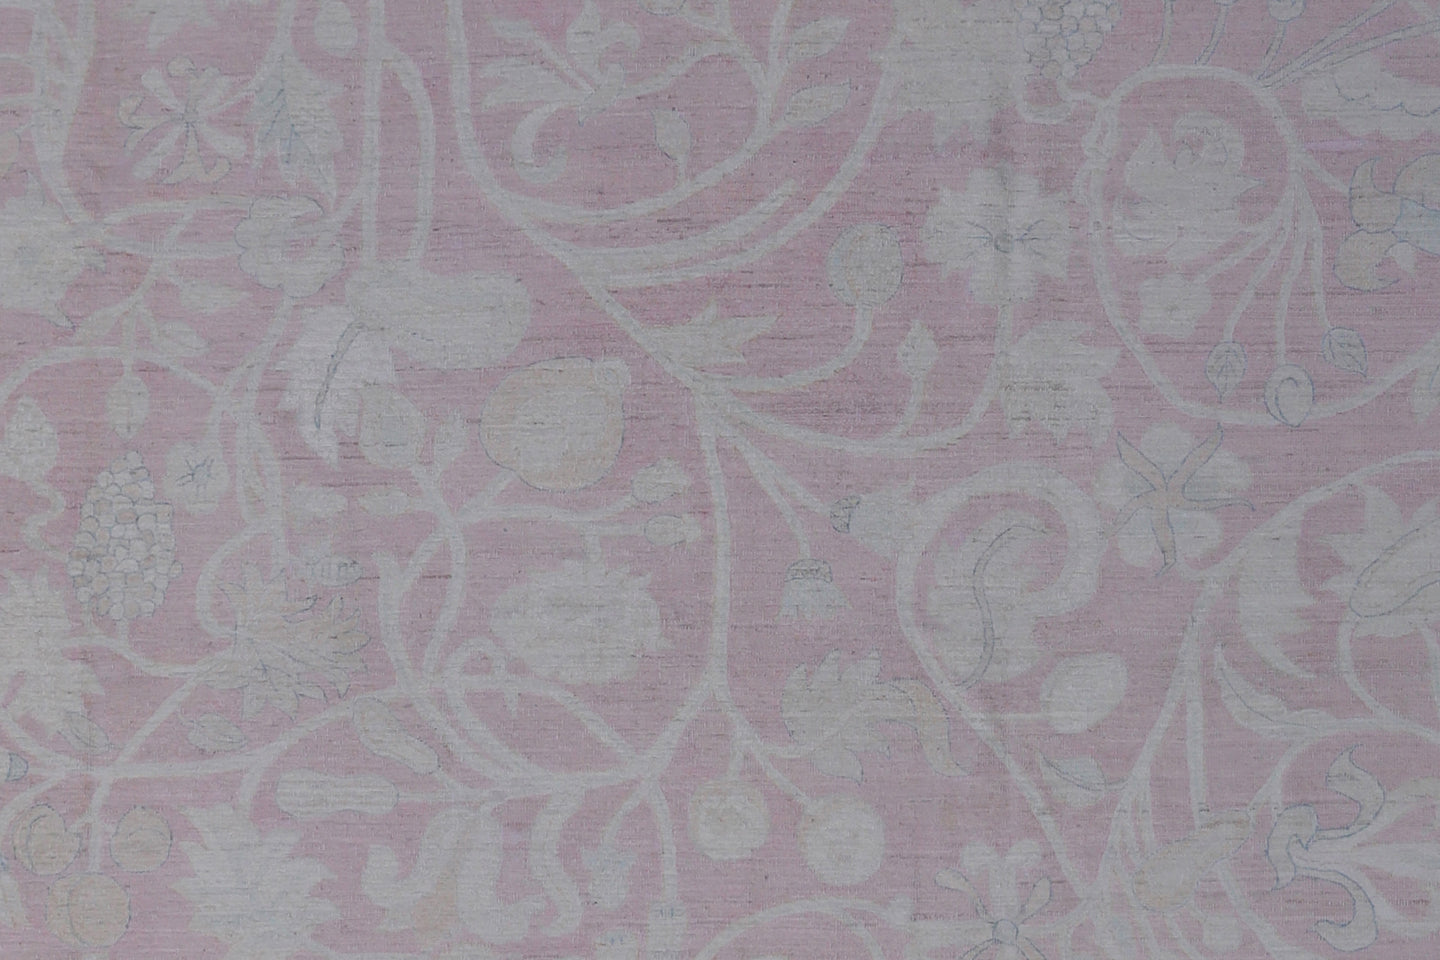 8'x9' Ariana Luxury Transitional Floral Pink Rug